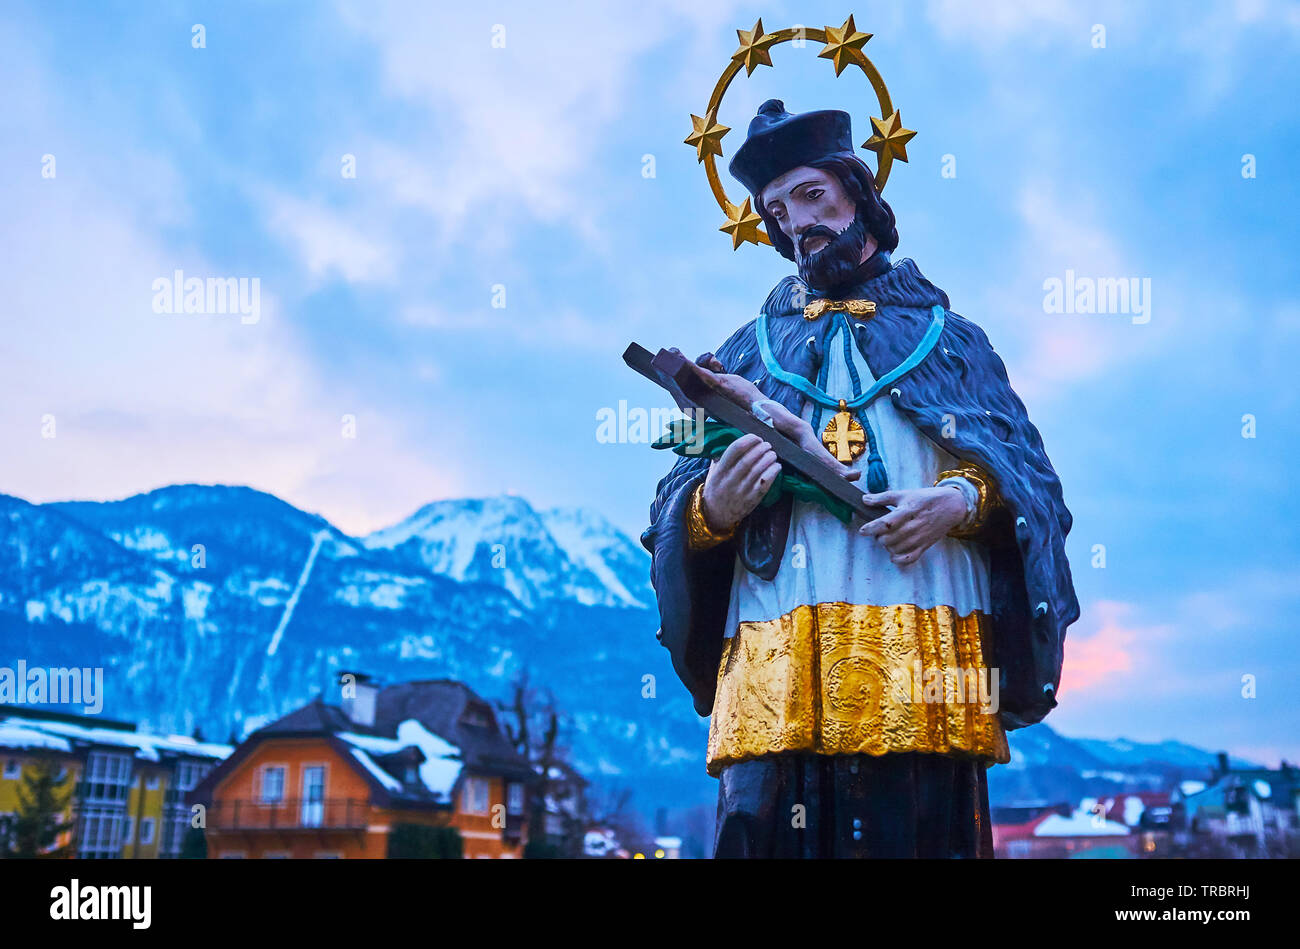 The close-up view of St Johannes Nepomuk statue in Bad Ischl with cloudy twilight sky on background, Salzkammergut, Austria Stock Photo